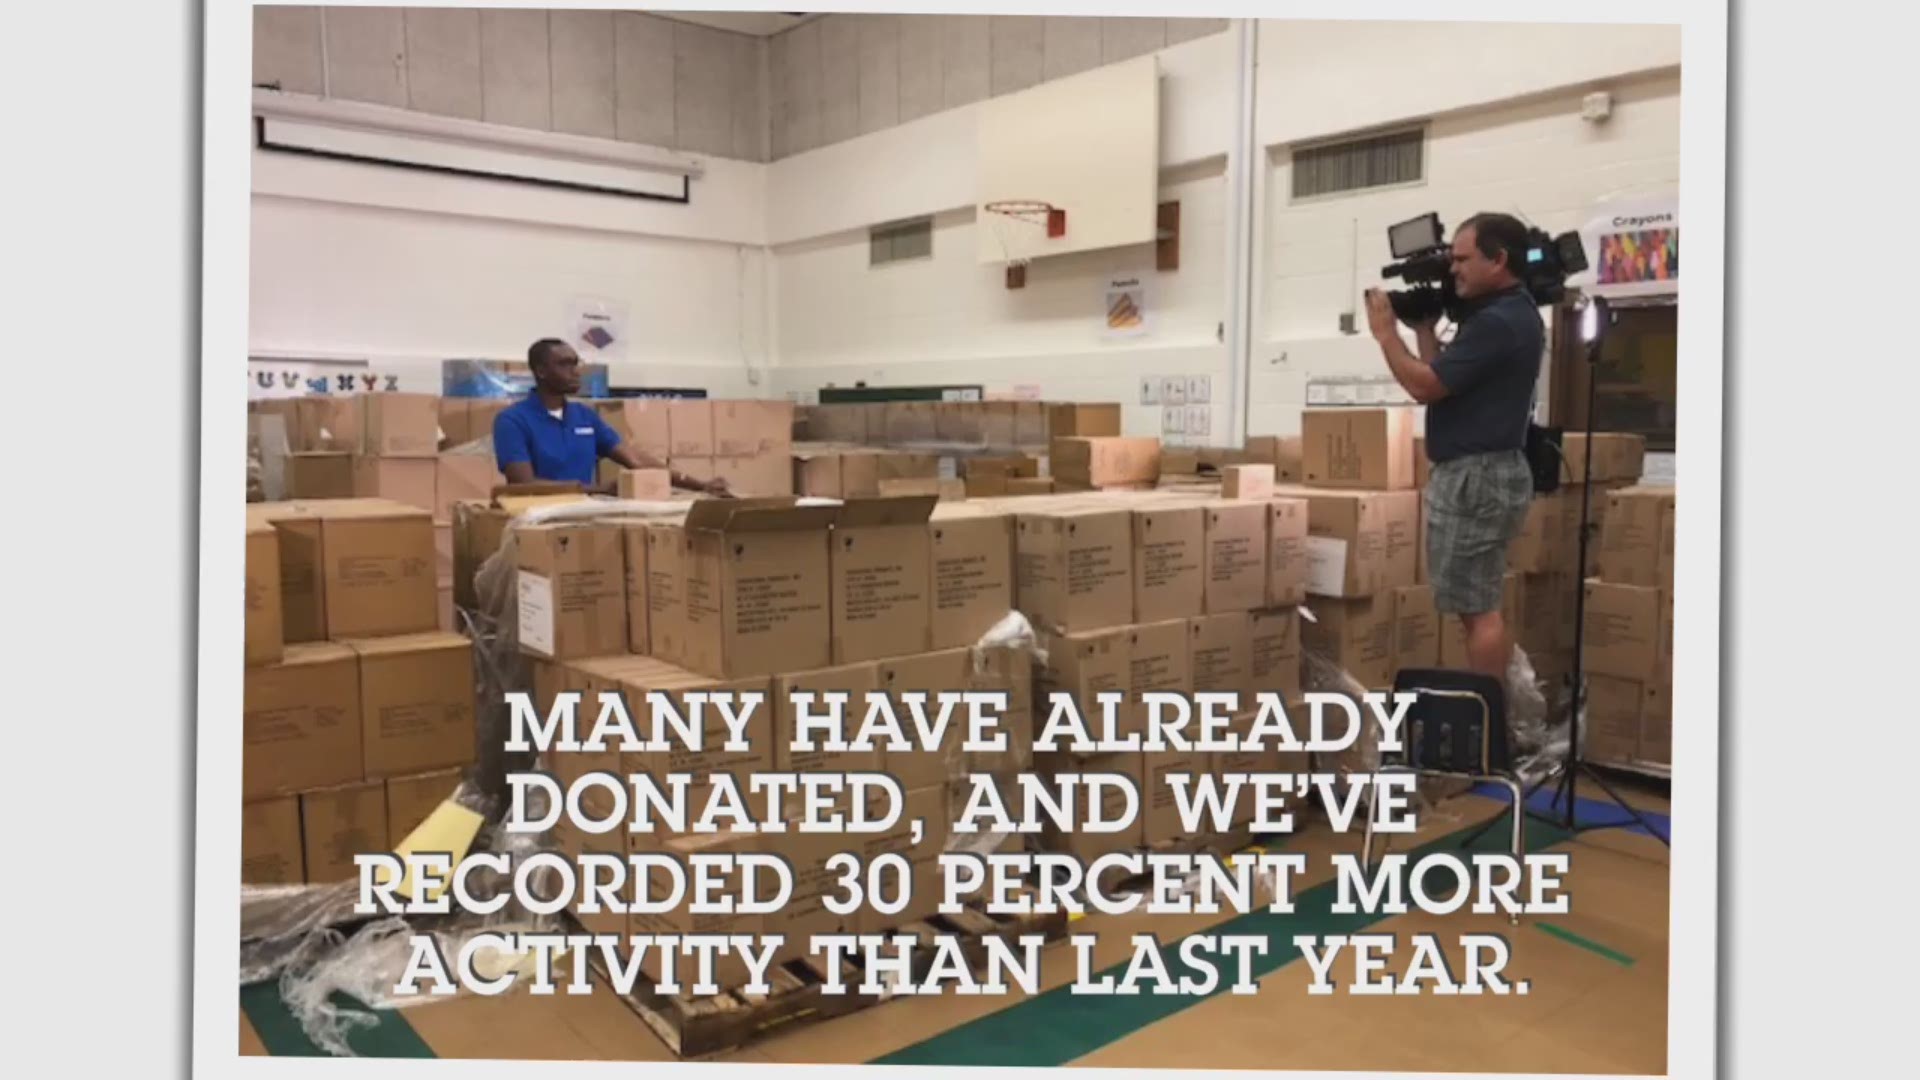 KVUE and H-E-B are accepted donations through the end of September.